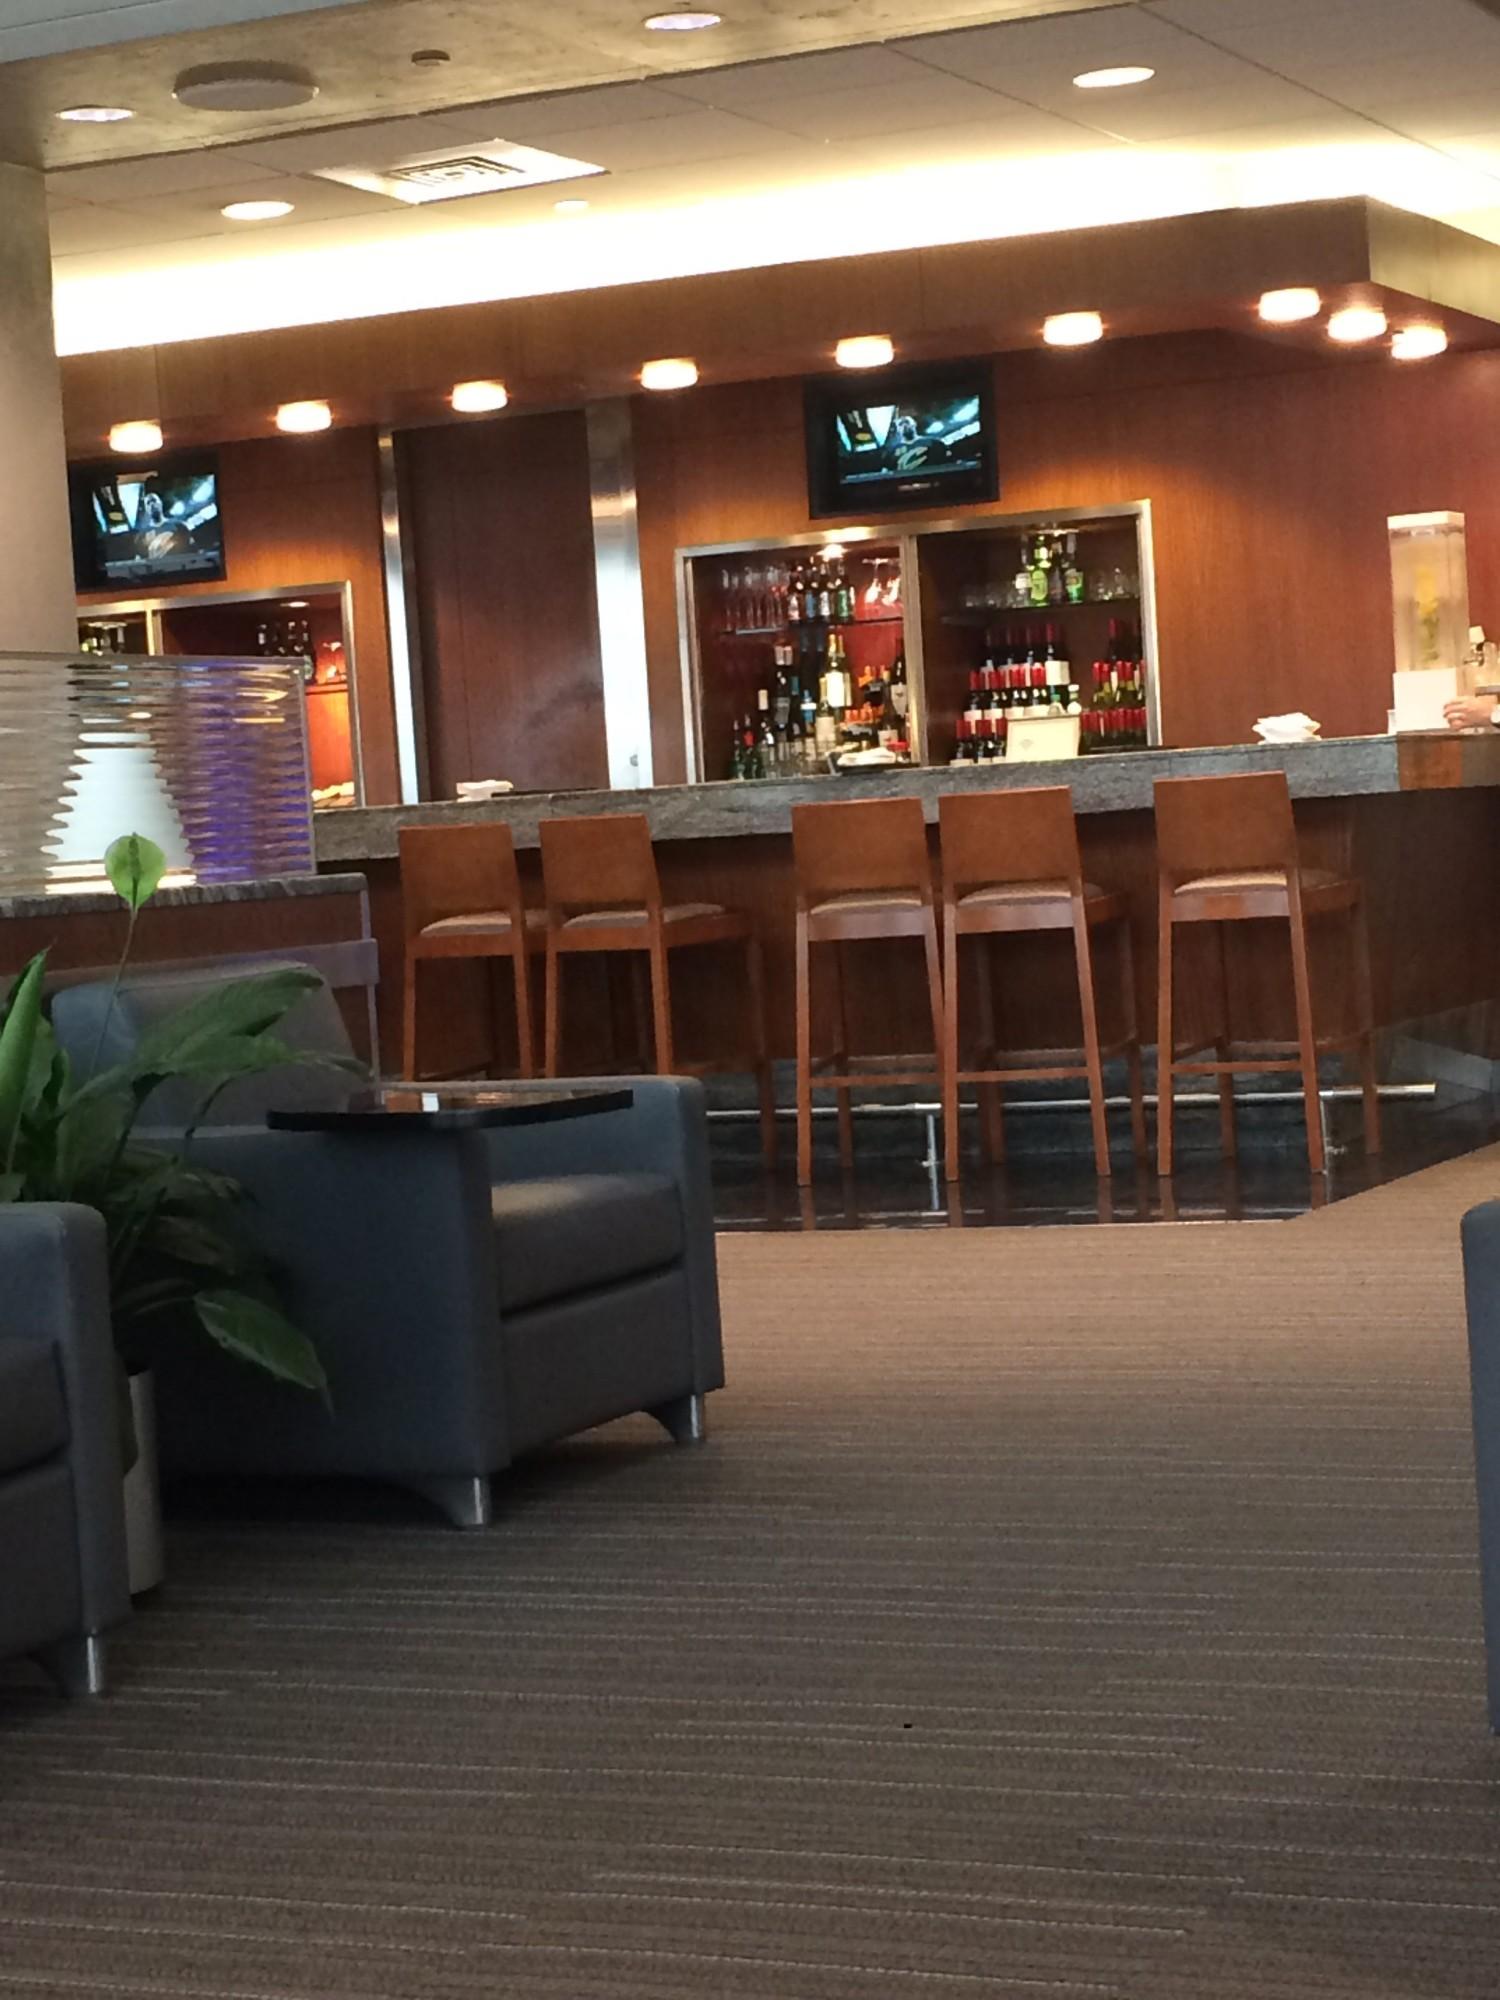 American Airlines Admirals Club image 16 of 48